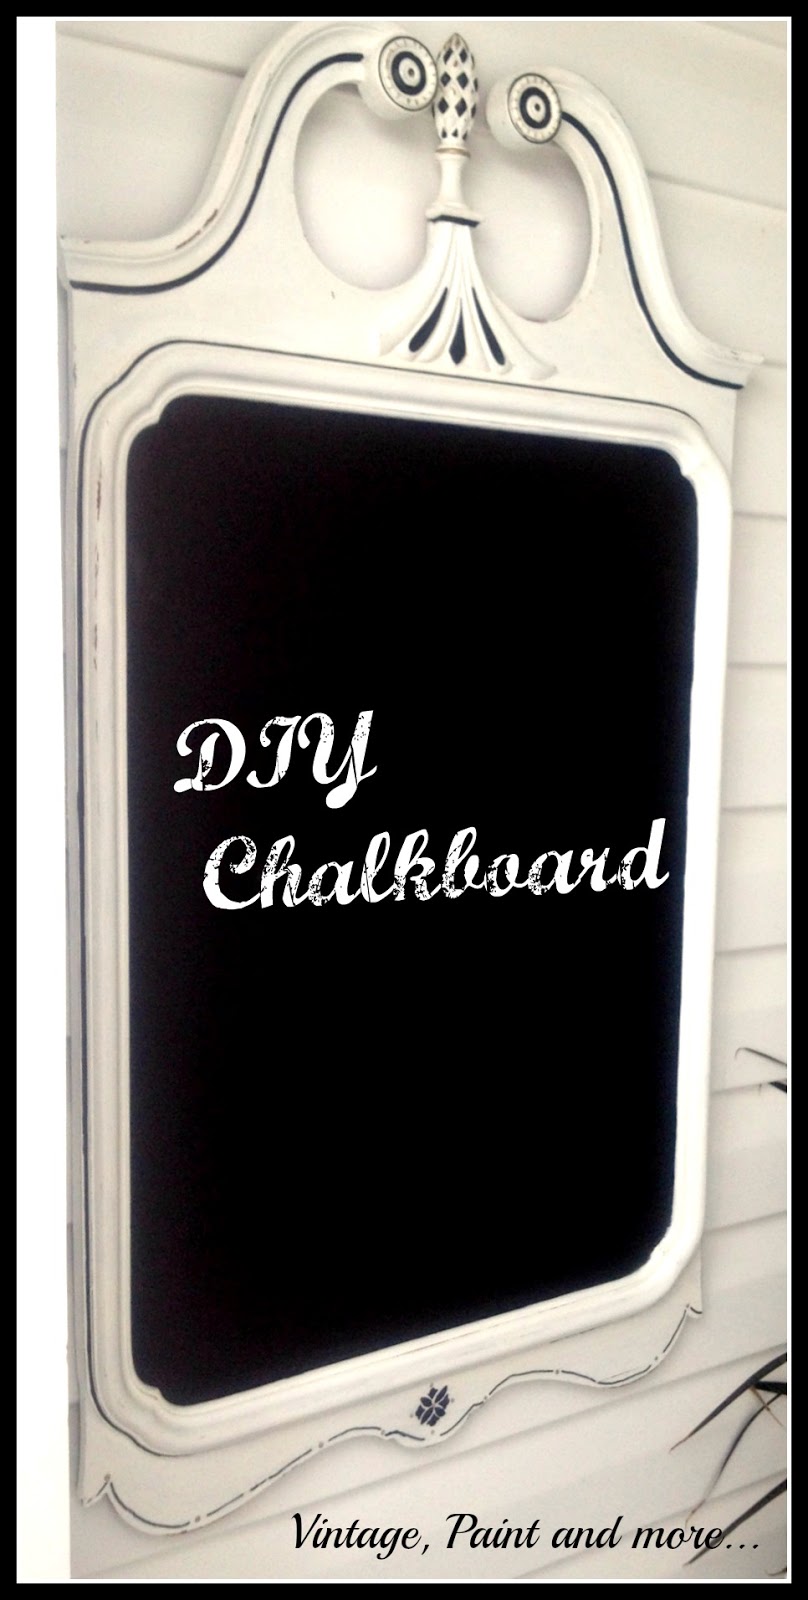 Vintage, Paint and more... Old mirror transformed into chalkboard with DIY chalkpaint